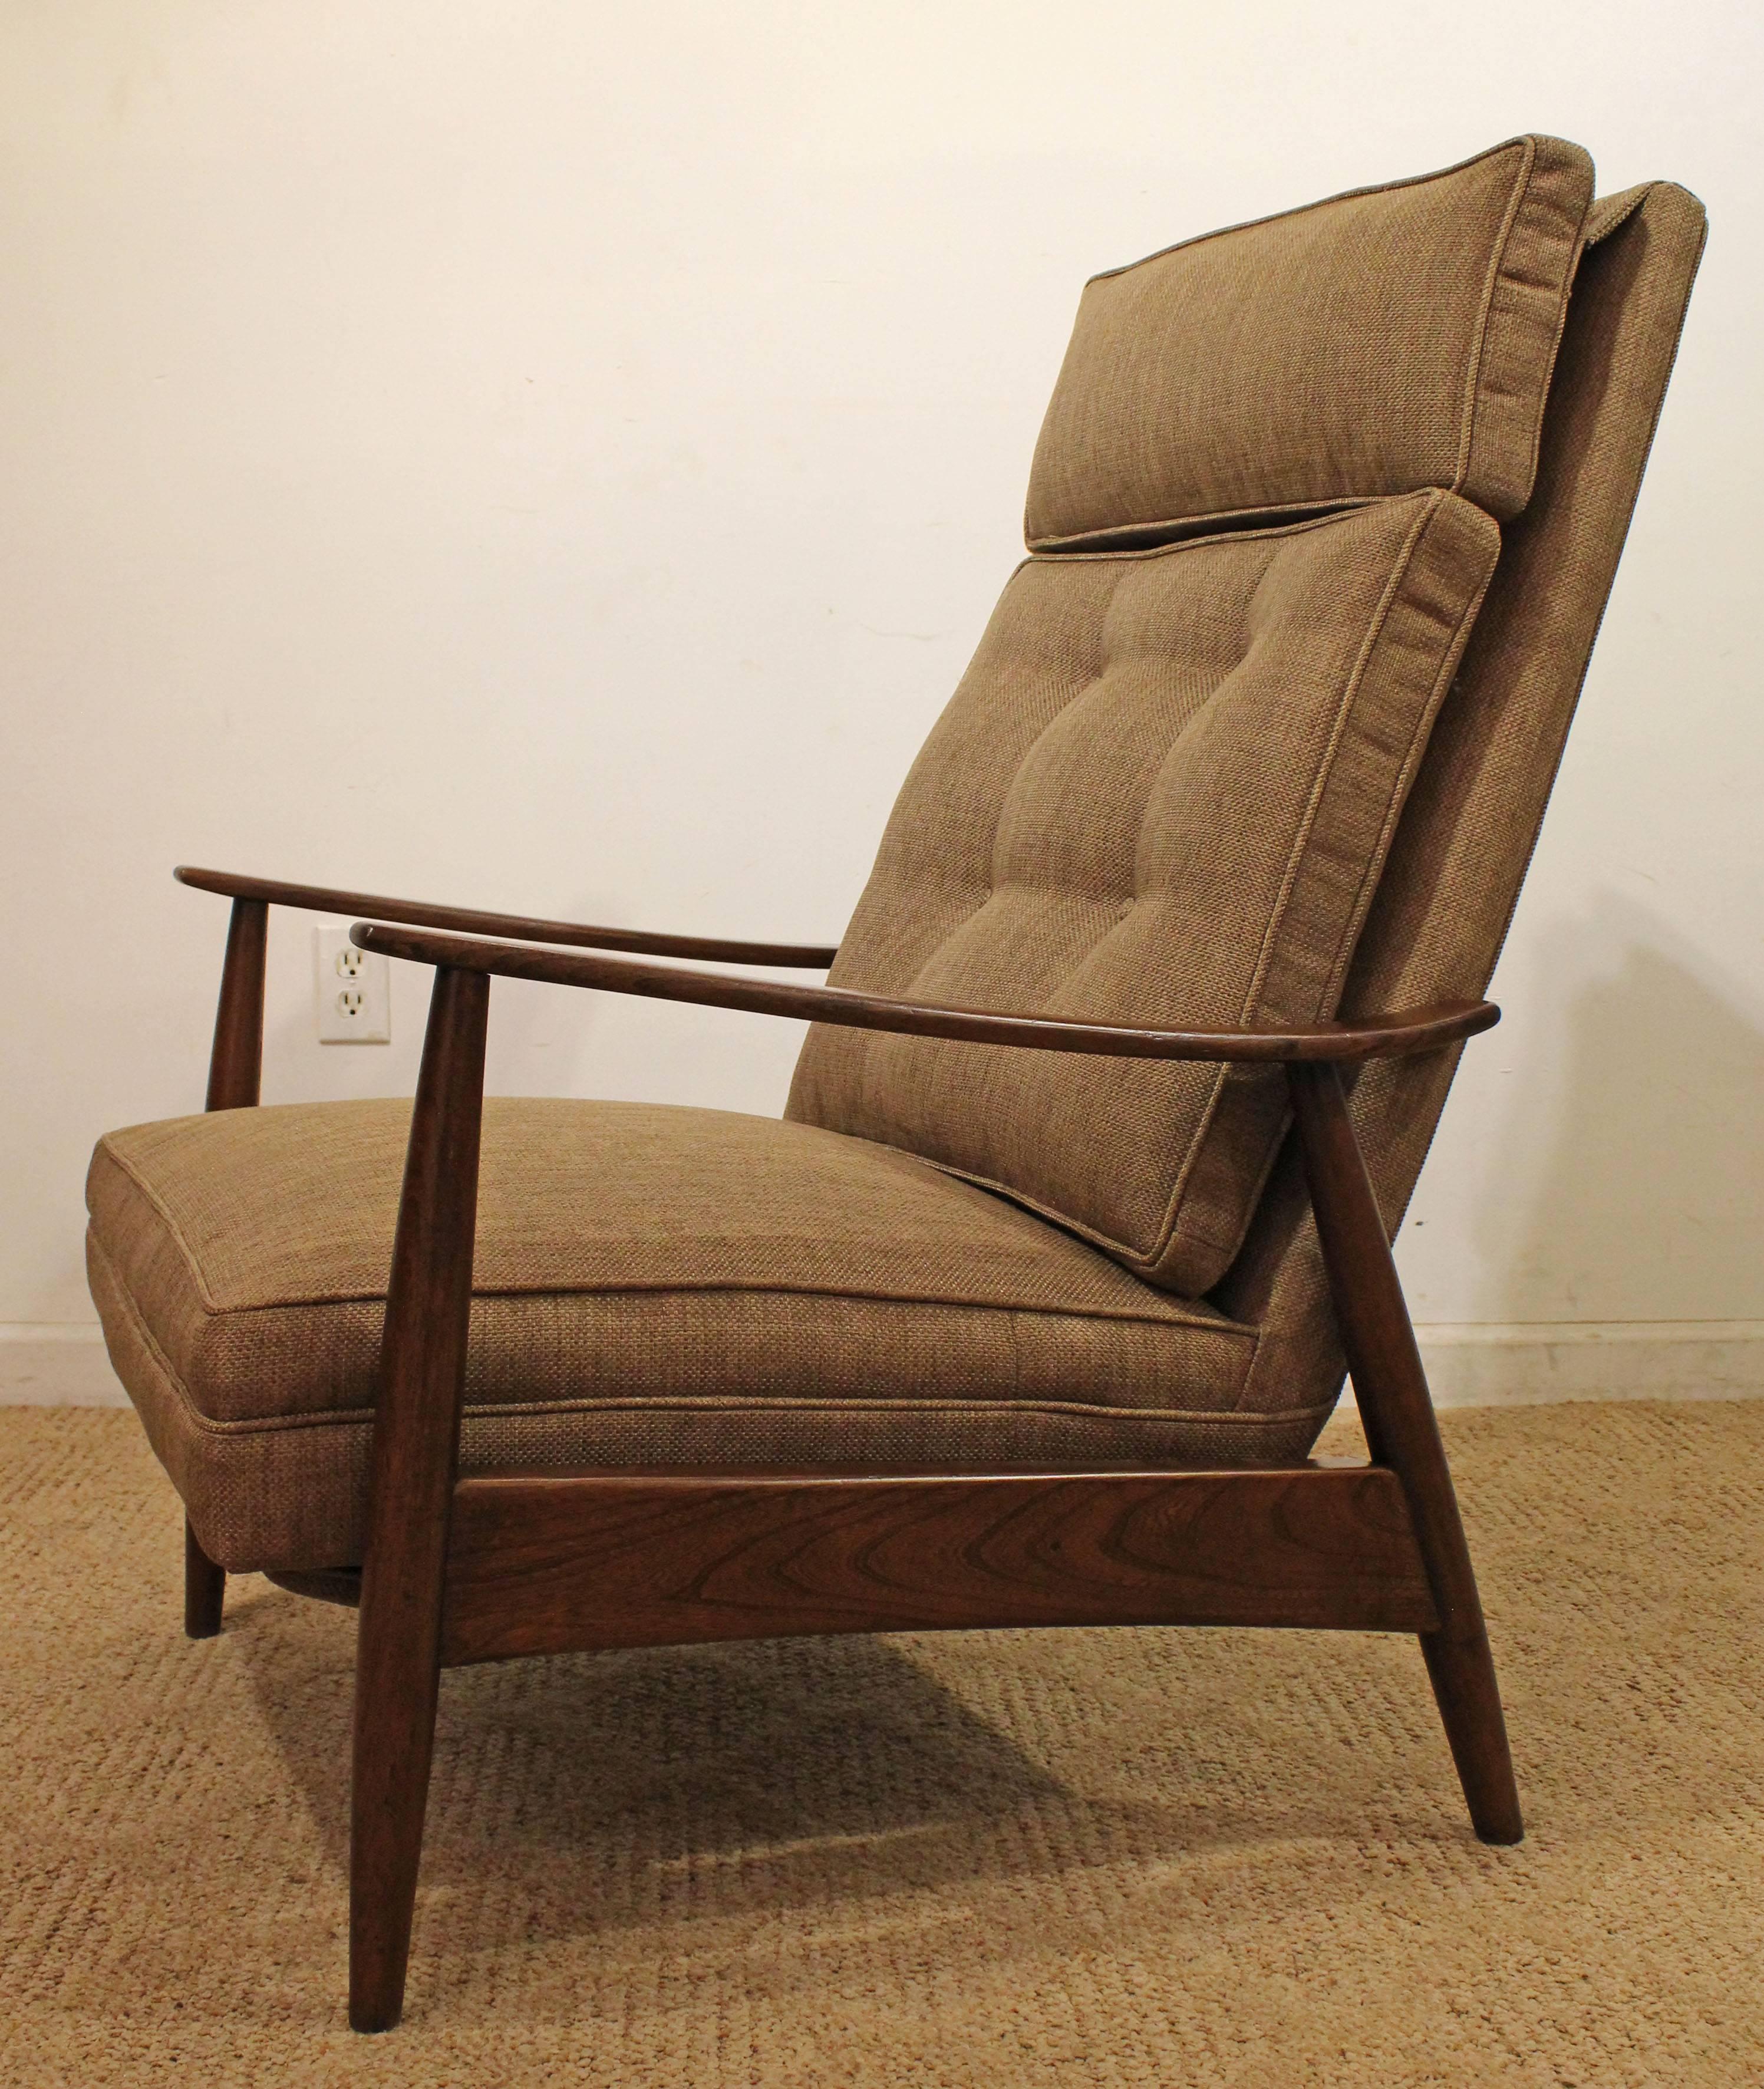 This piece was designed by Milo Baughman for James Inc. It is made of walnut and reclines. It is in excellent condition, has been completely restored.

Approximate dimensions:
chair: 28